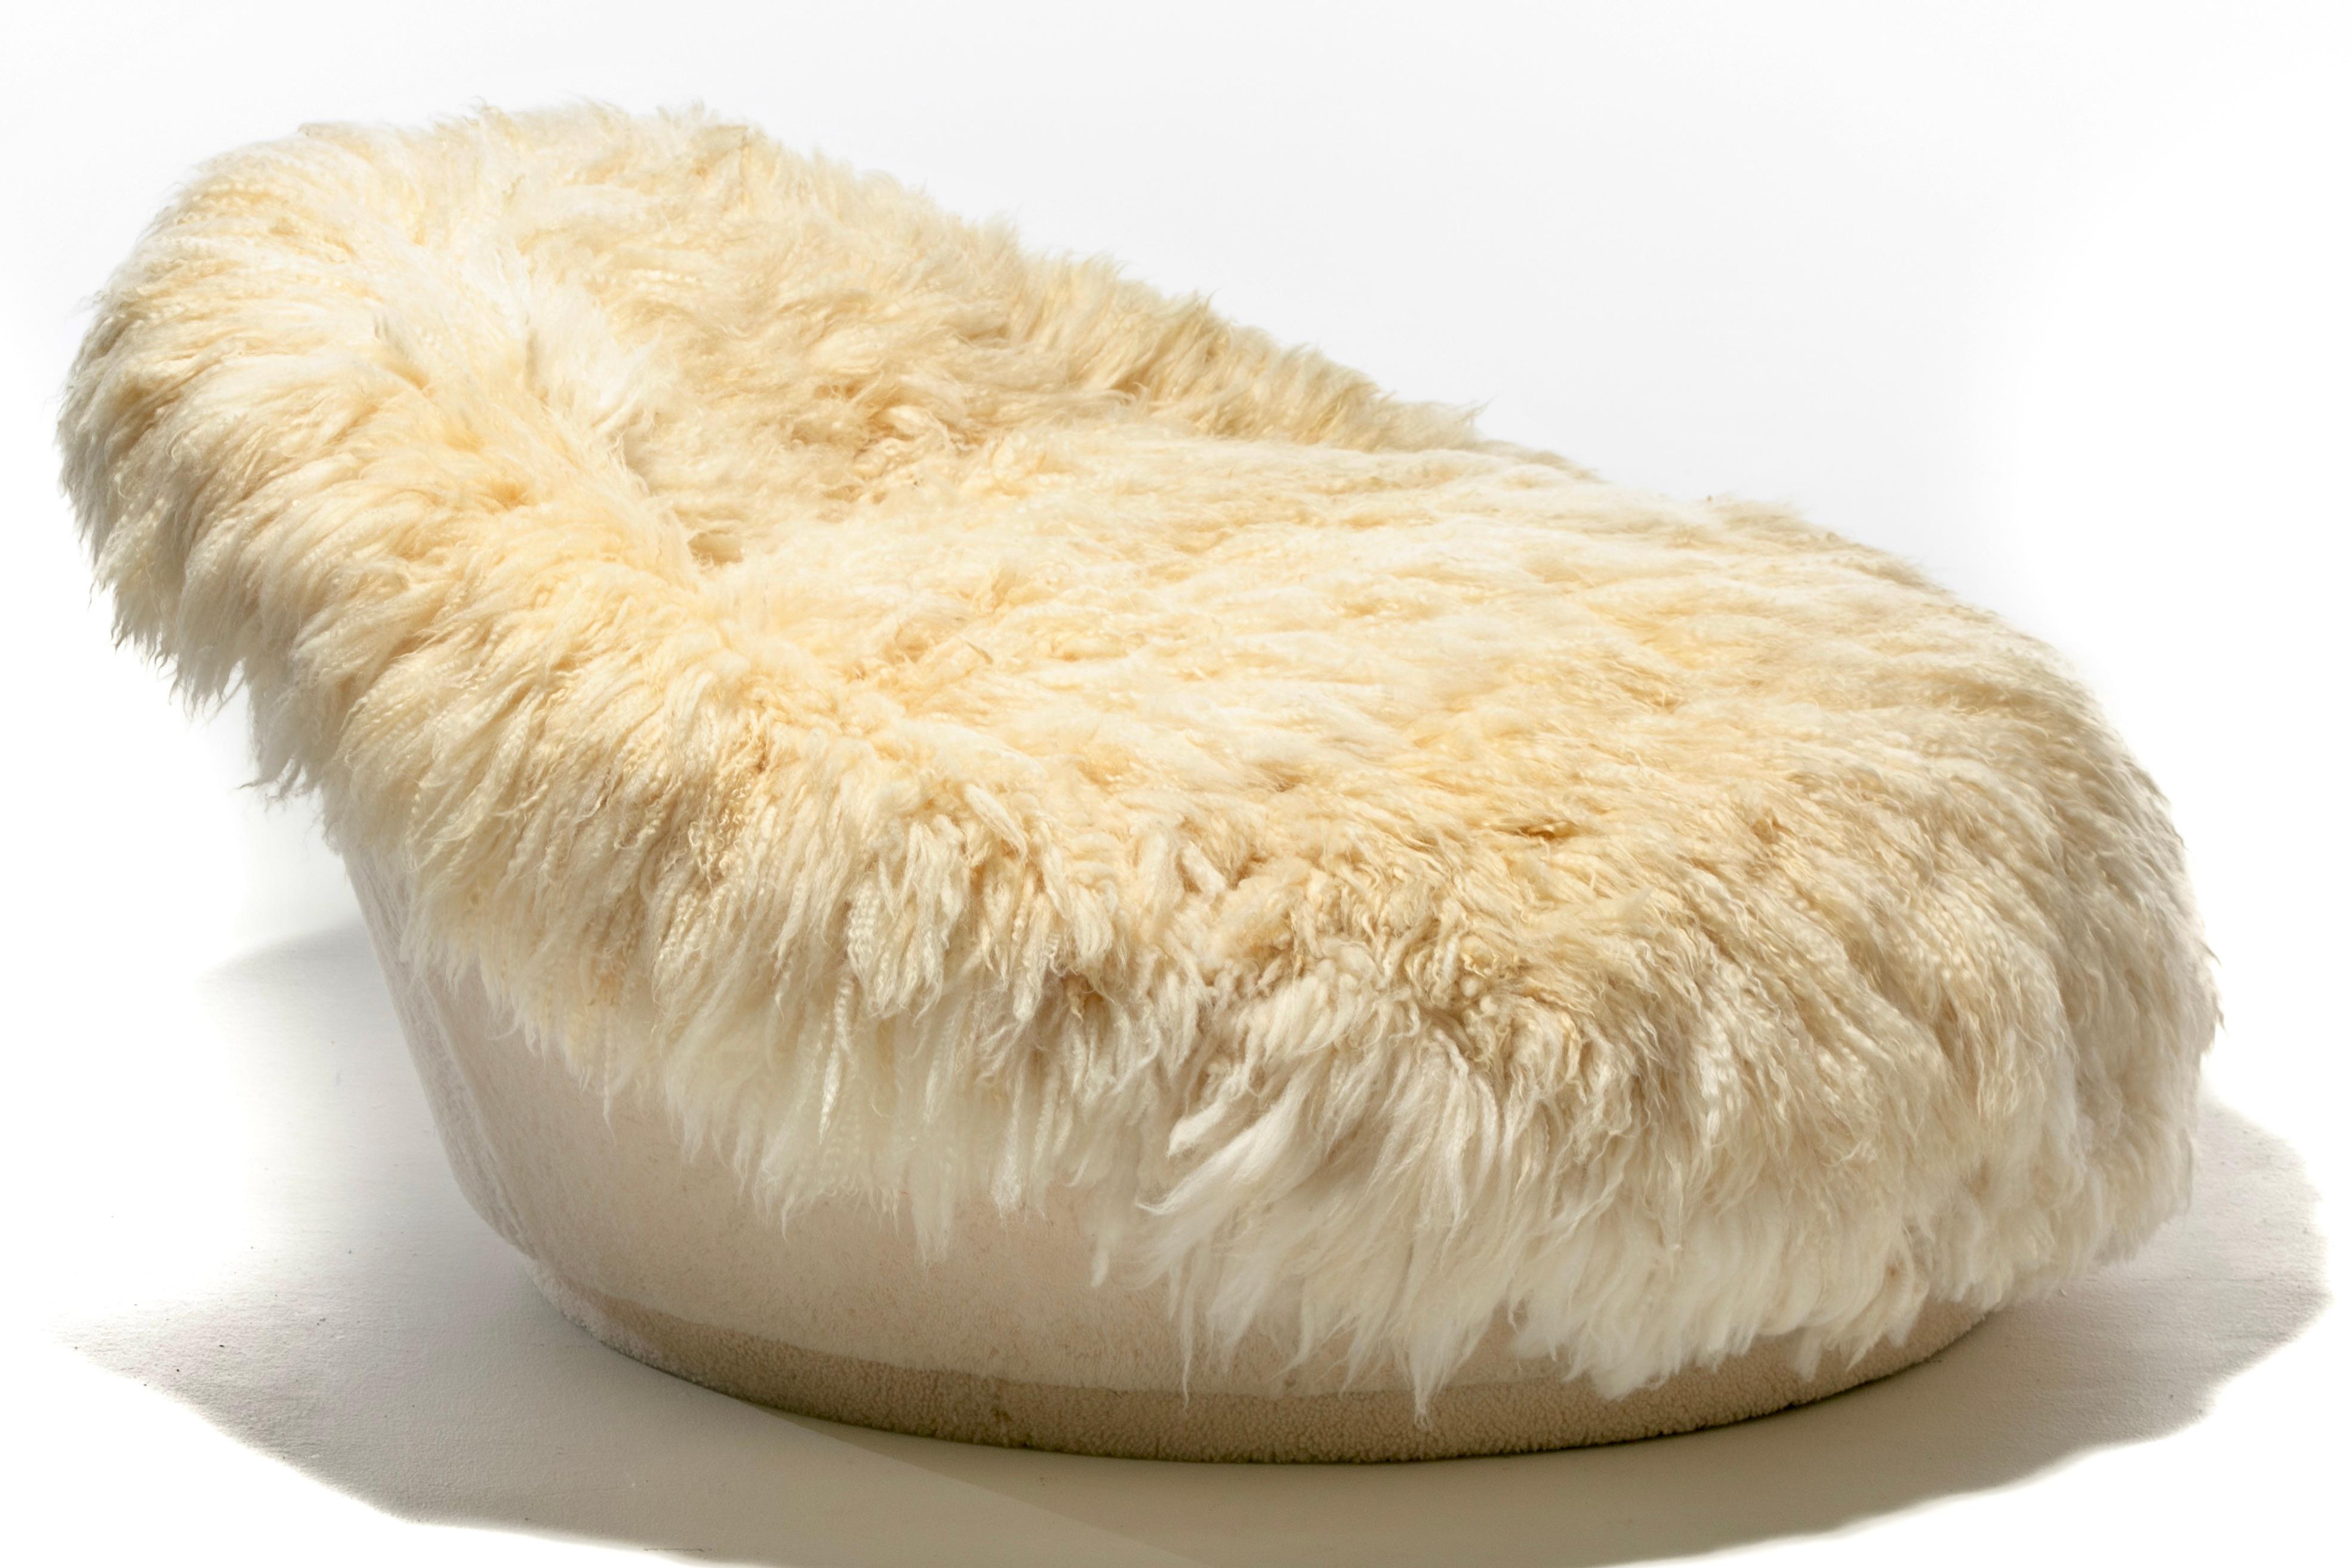 Mid-20th Century Milo Baughman Style Satellite Lounge in Napa Valley Sheepskins & Ivory Shearling For Sale